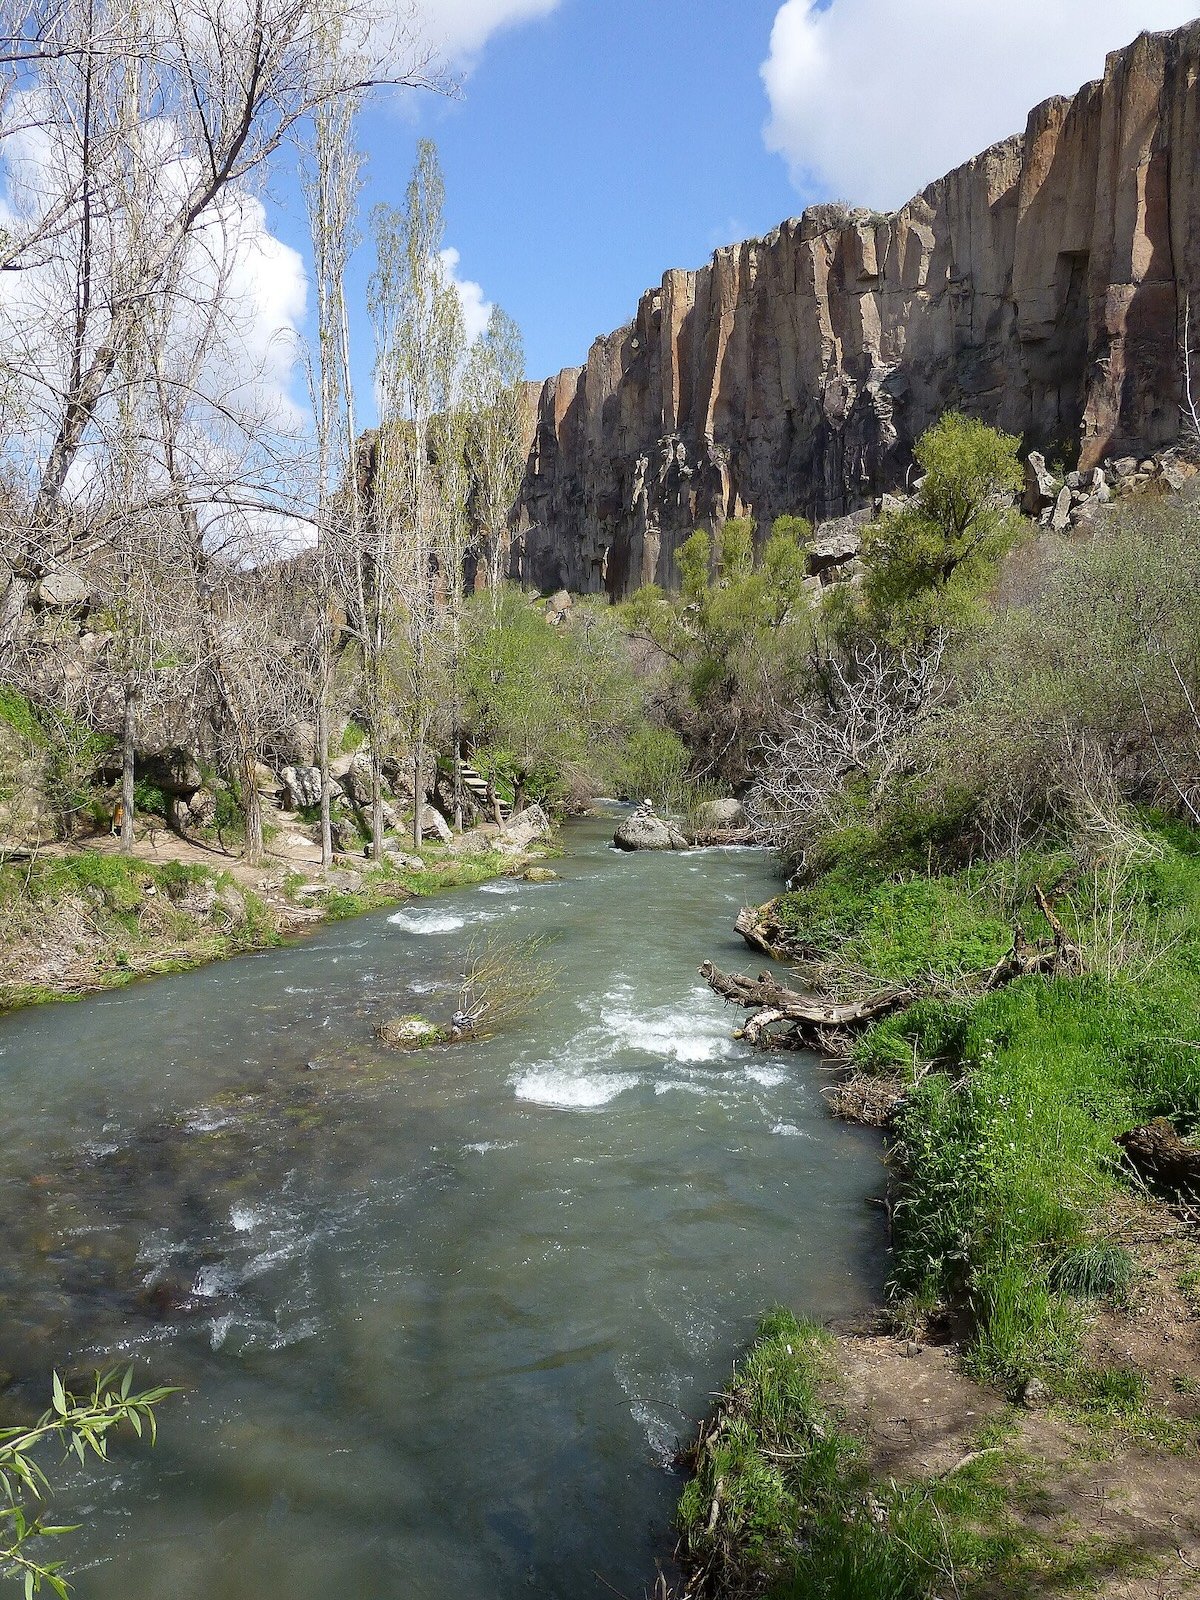 Melendiz river flowing through a lush valley with tall, rugged cliffs on one side under a clear blue sky in Cappadocia